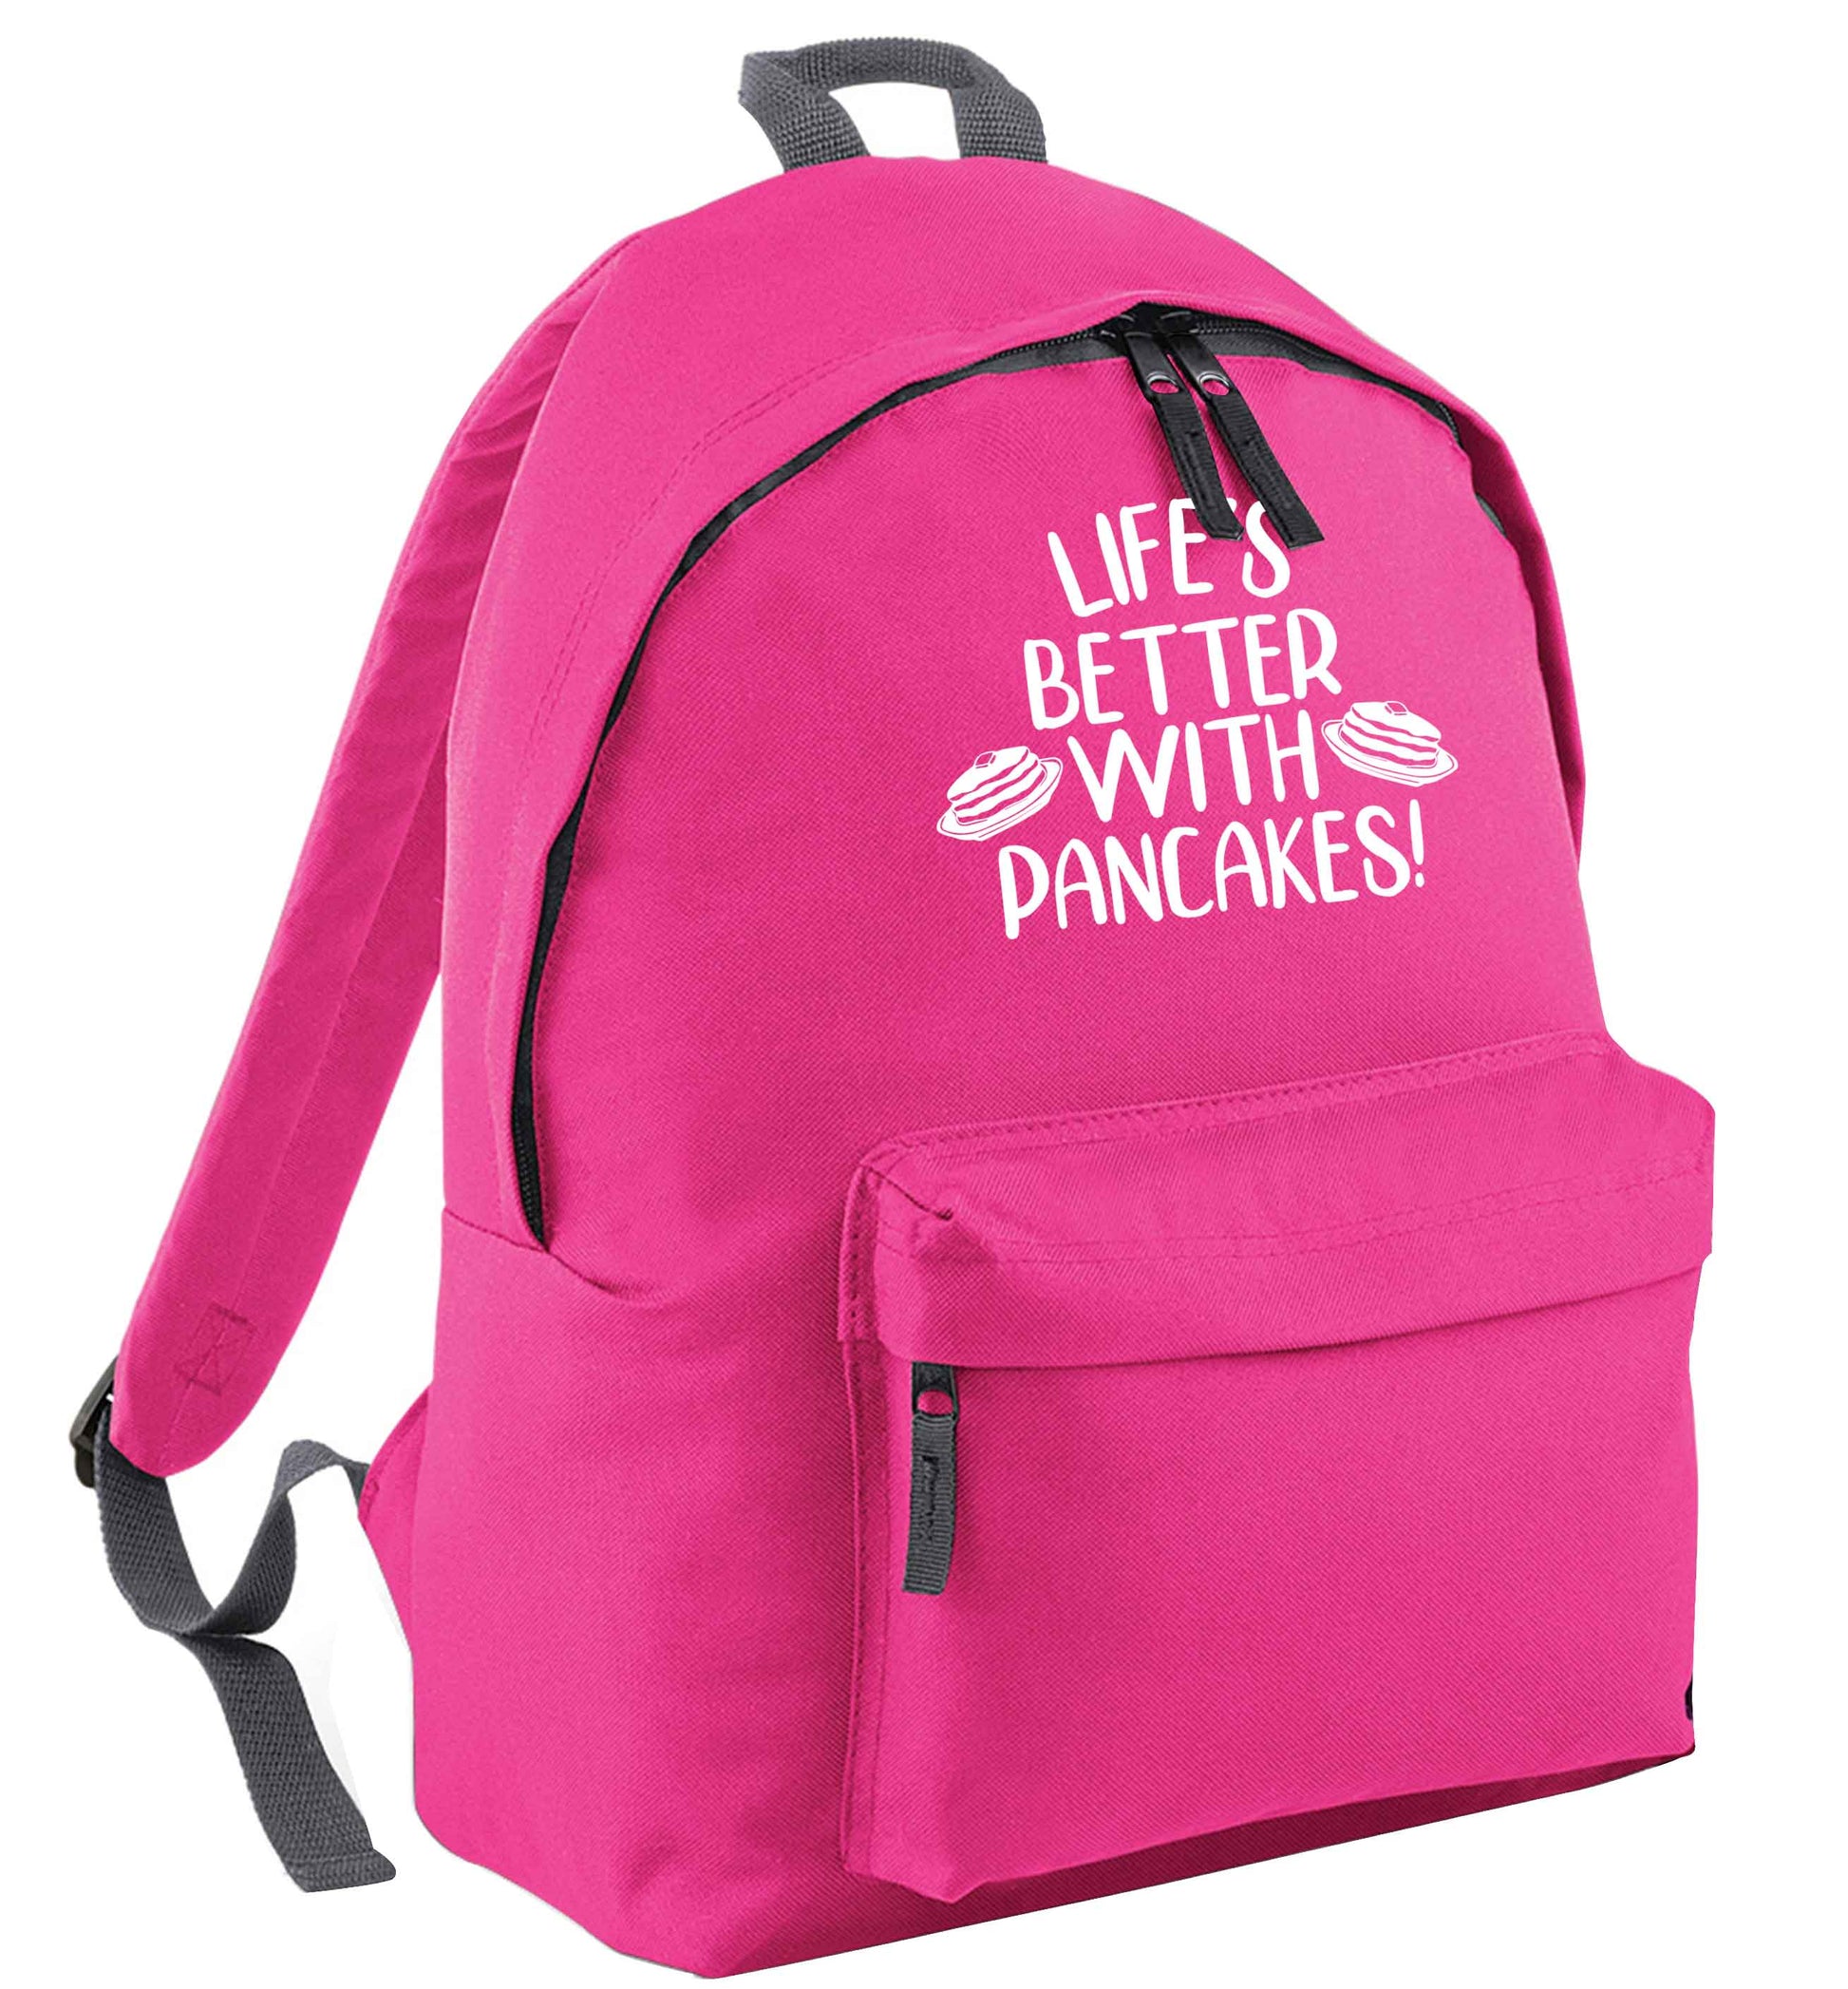 Life's better with pancakes pink adults backpack